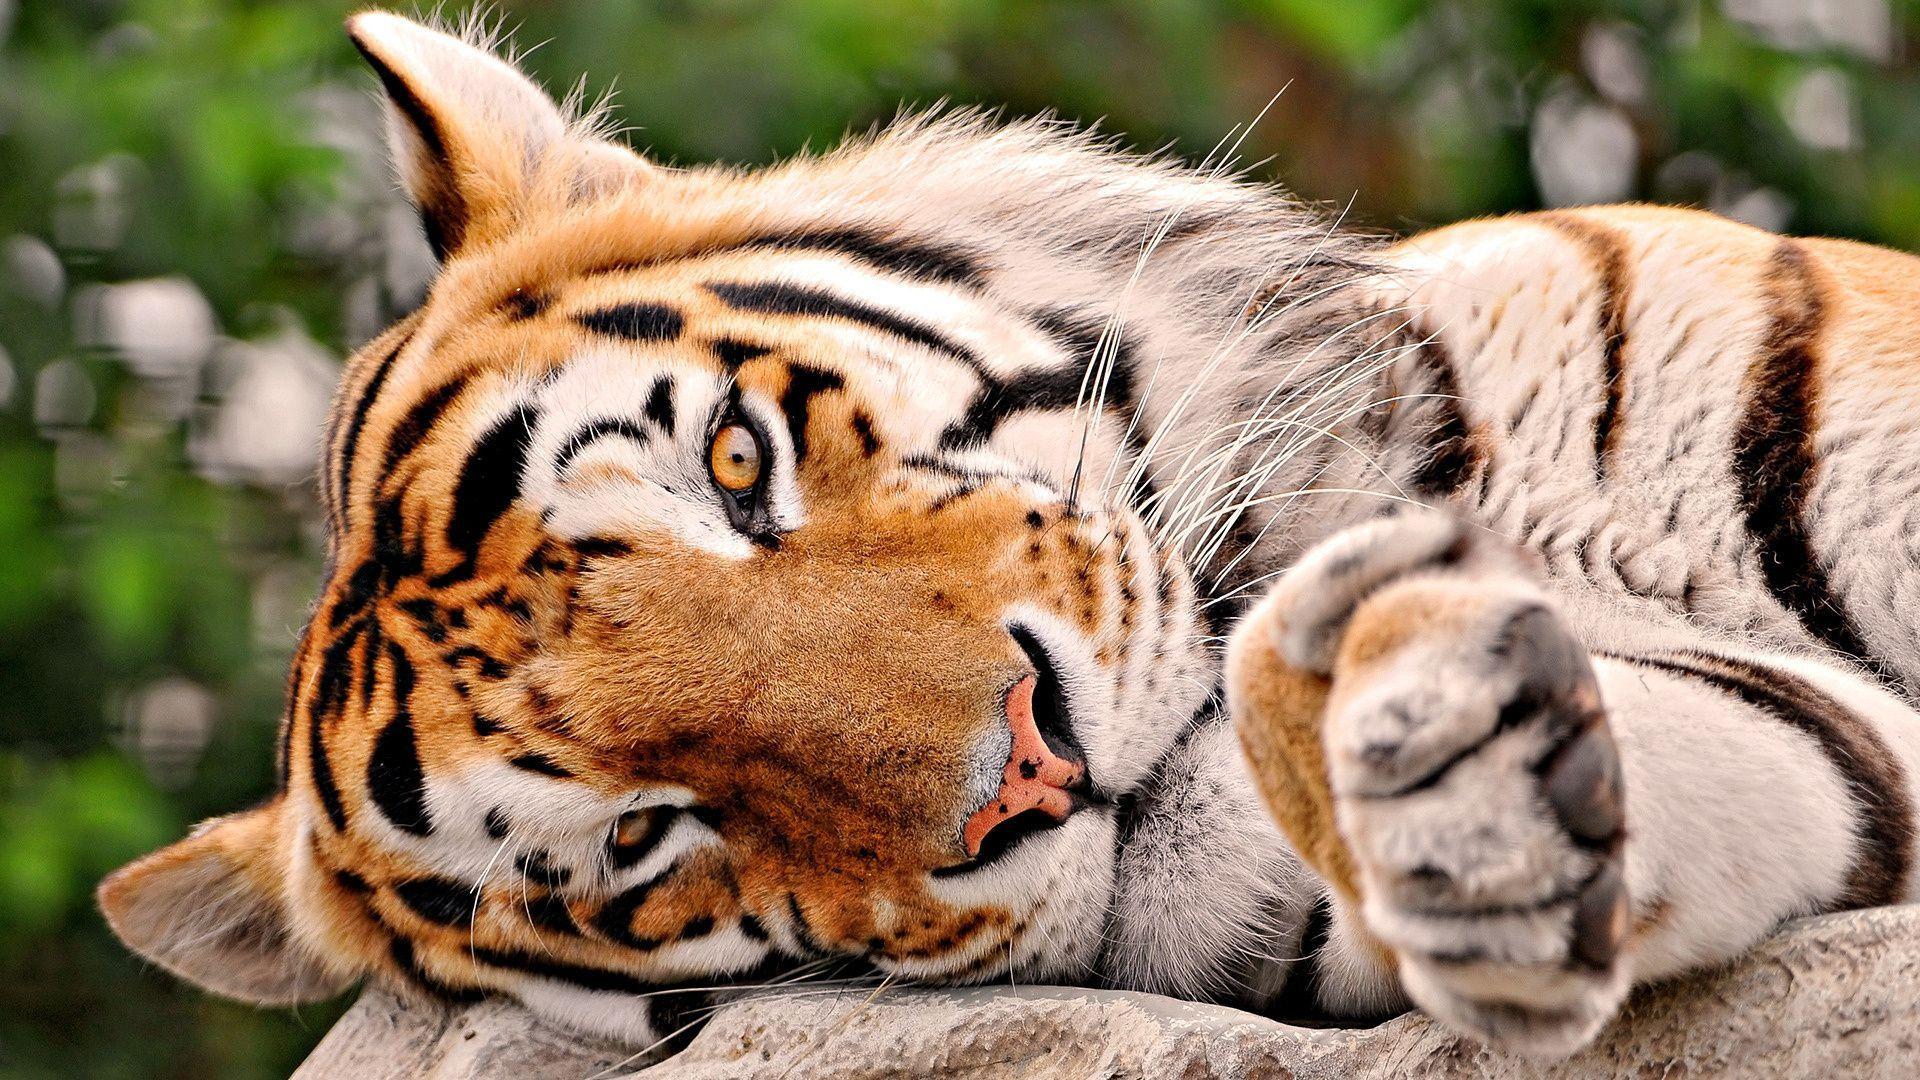 Tiger Close Up HD Wallpaper in 1920x1080 Resolution. My style